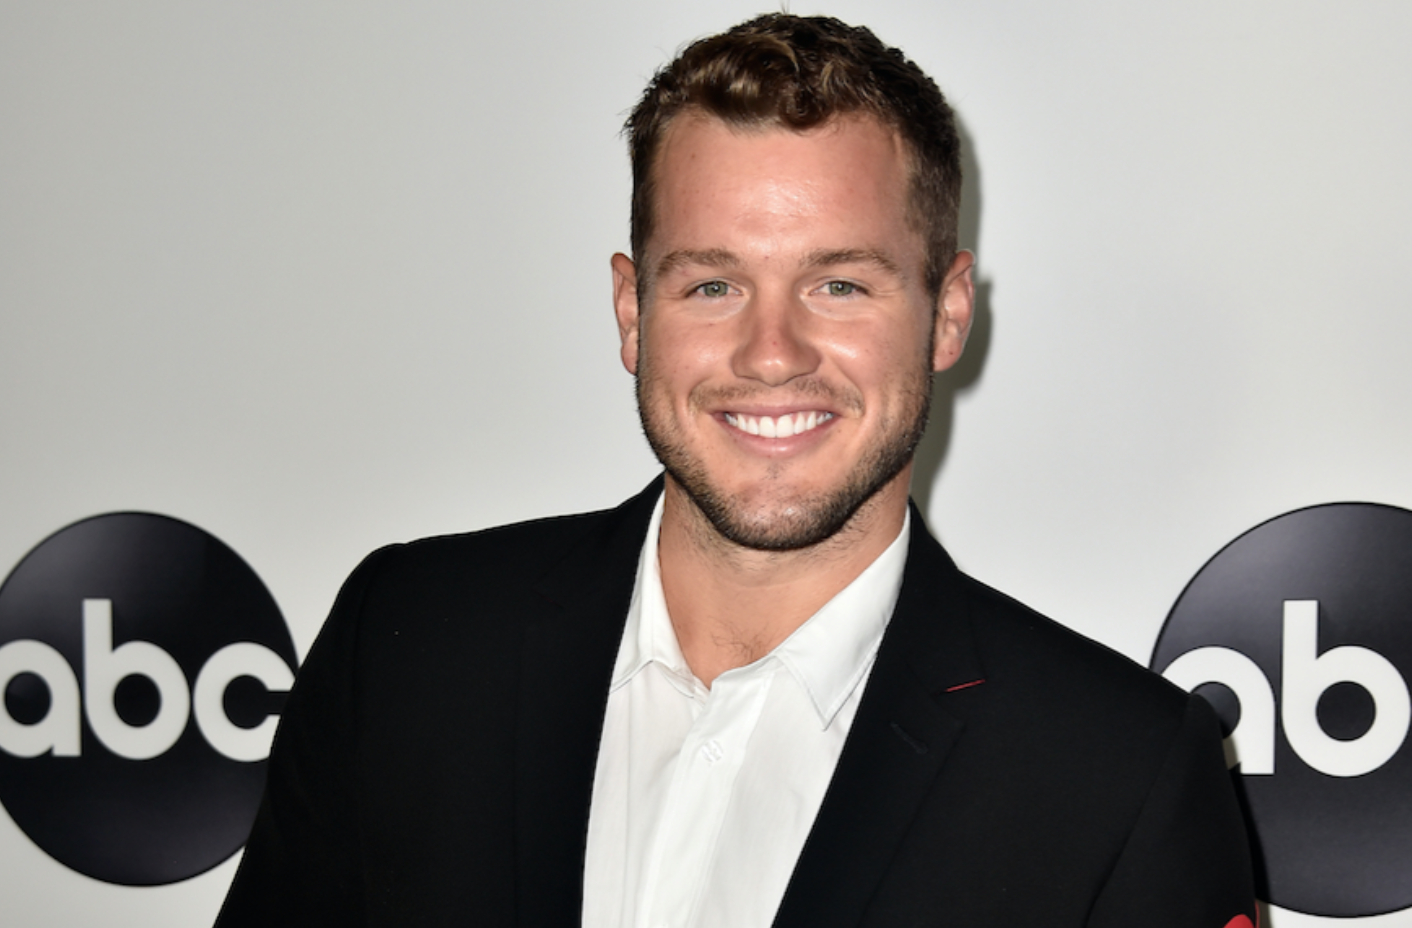 Colton Underwood Picked As The Bachelor After Tia Booth Break Up 1205